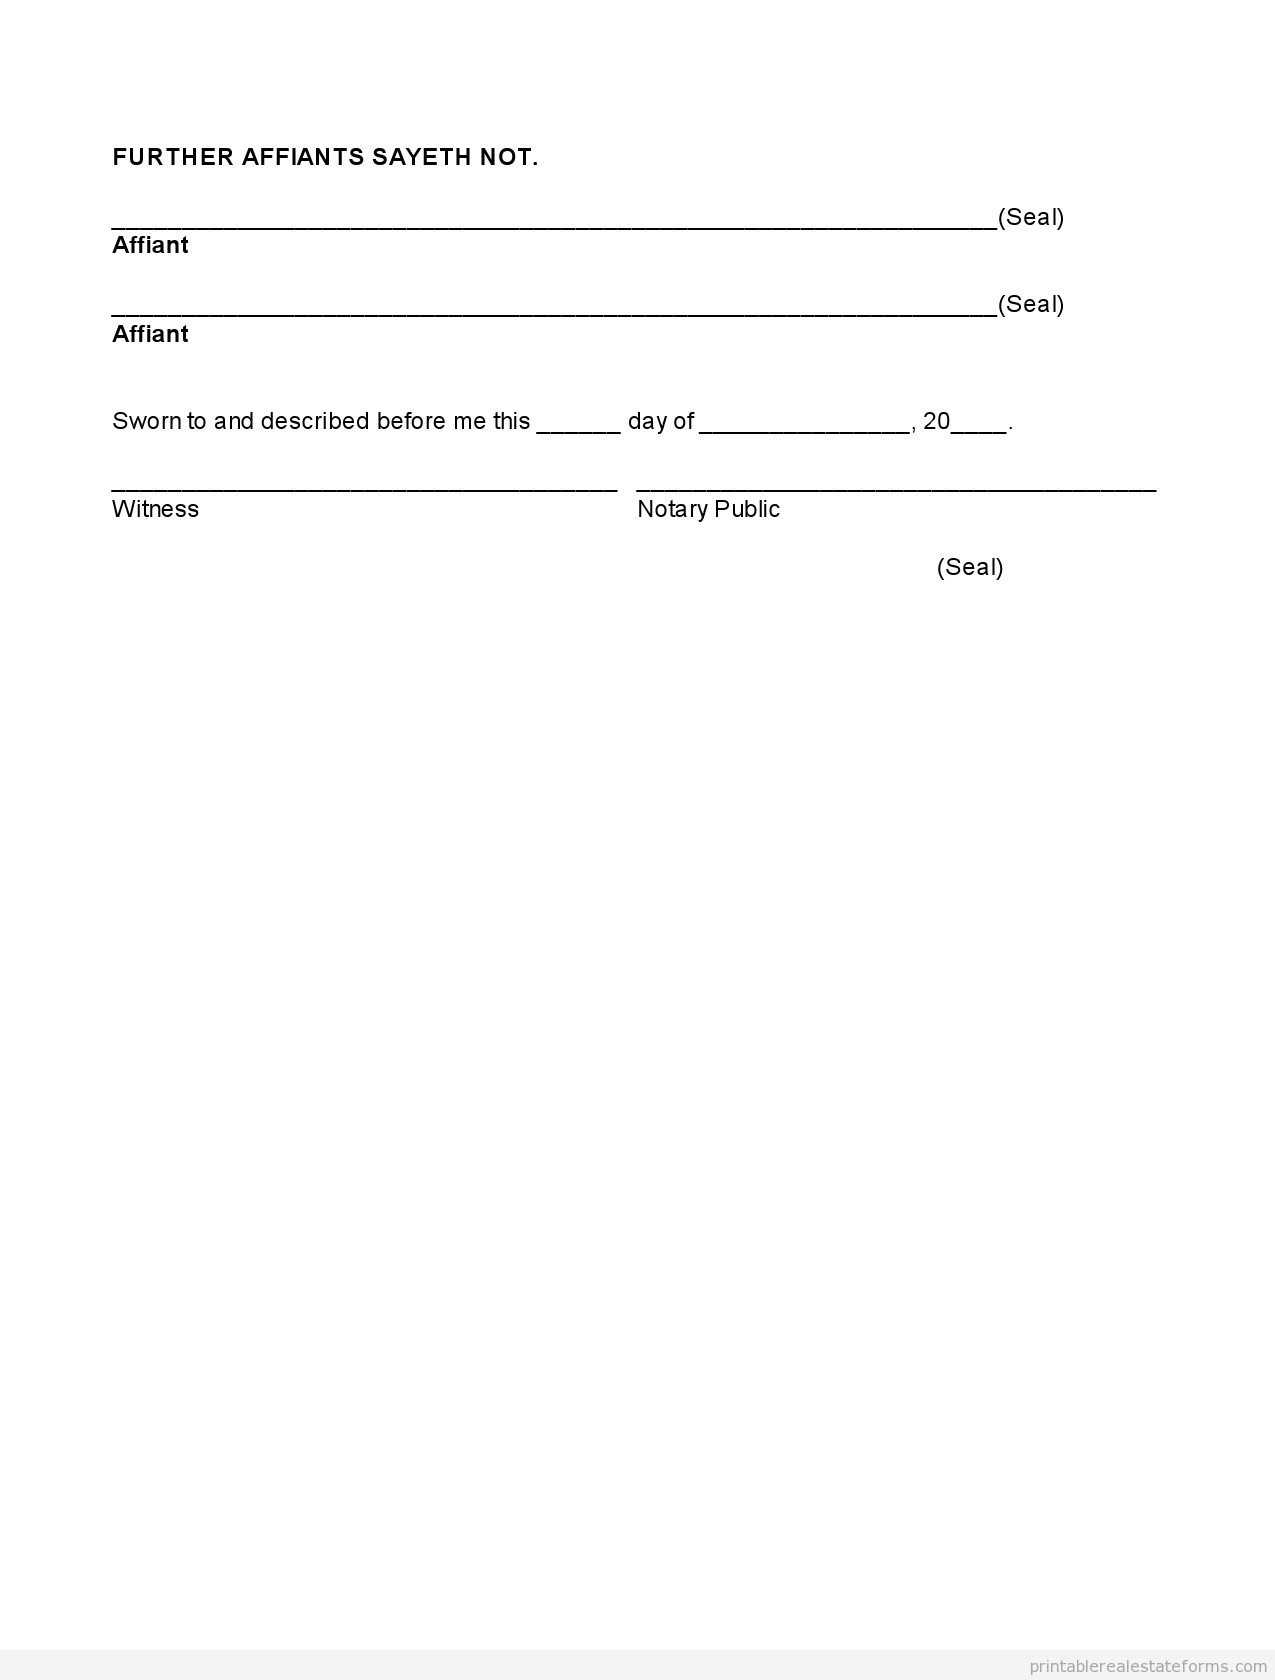 Circles Worksheet Answers together with Worksheet Square Numbers Inspirationa Homonyms Worksheets Best